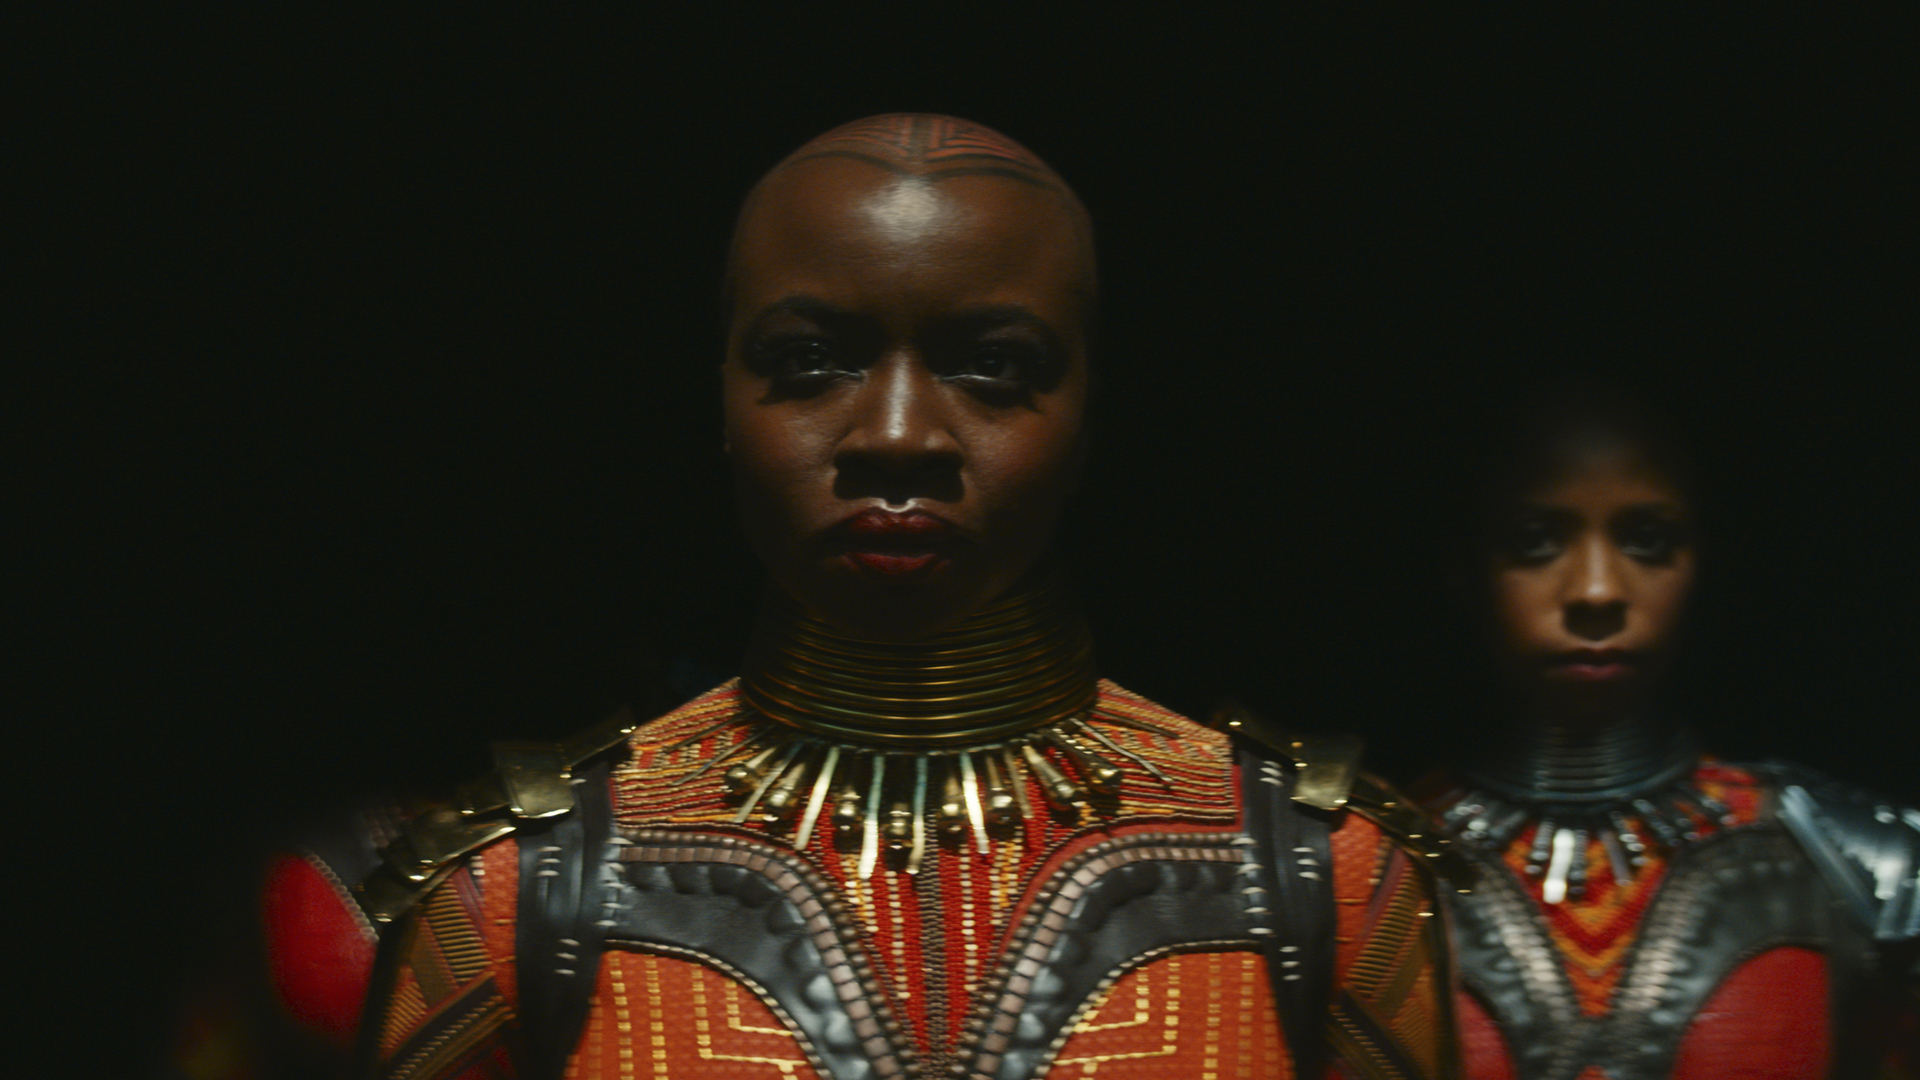 Okoye and Dora Milaje emerge from the shadows in Black Panther: Wakanda Forever